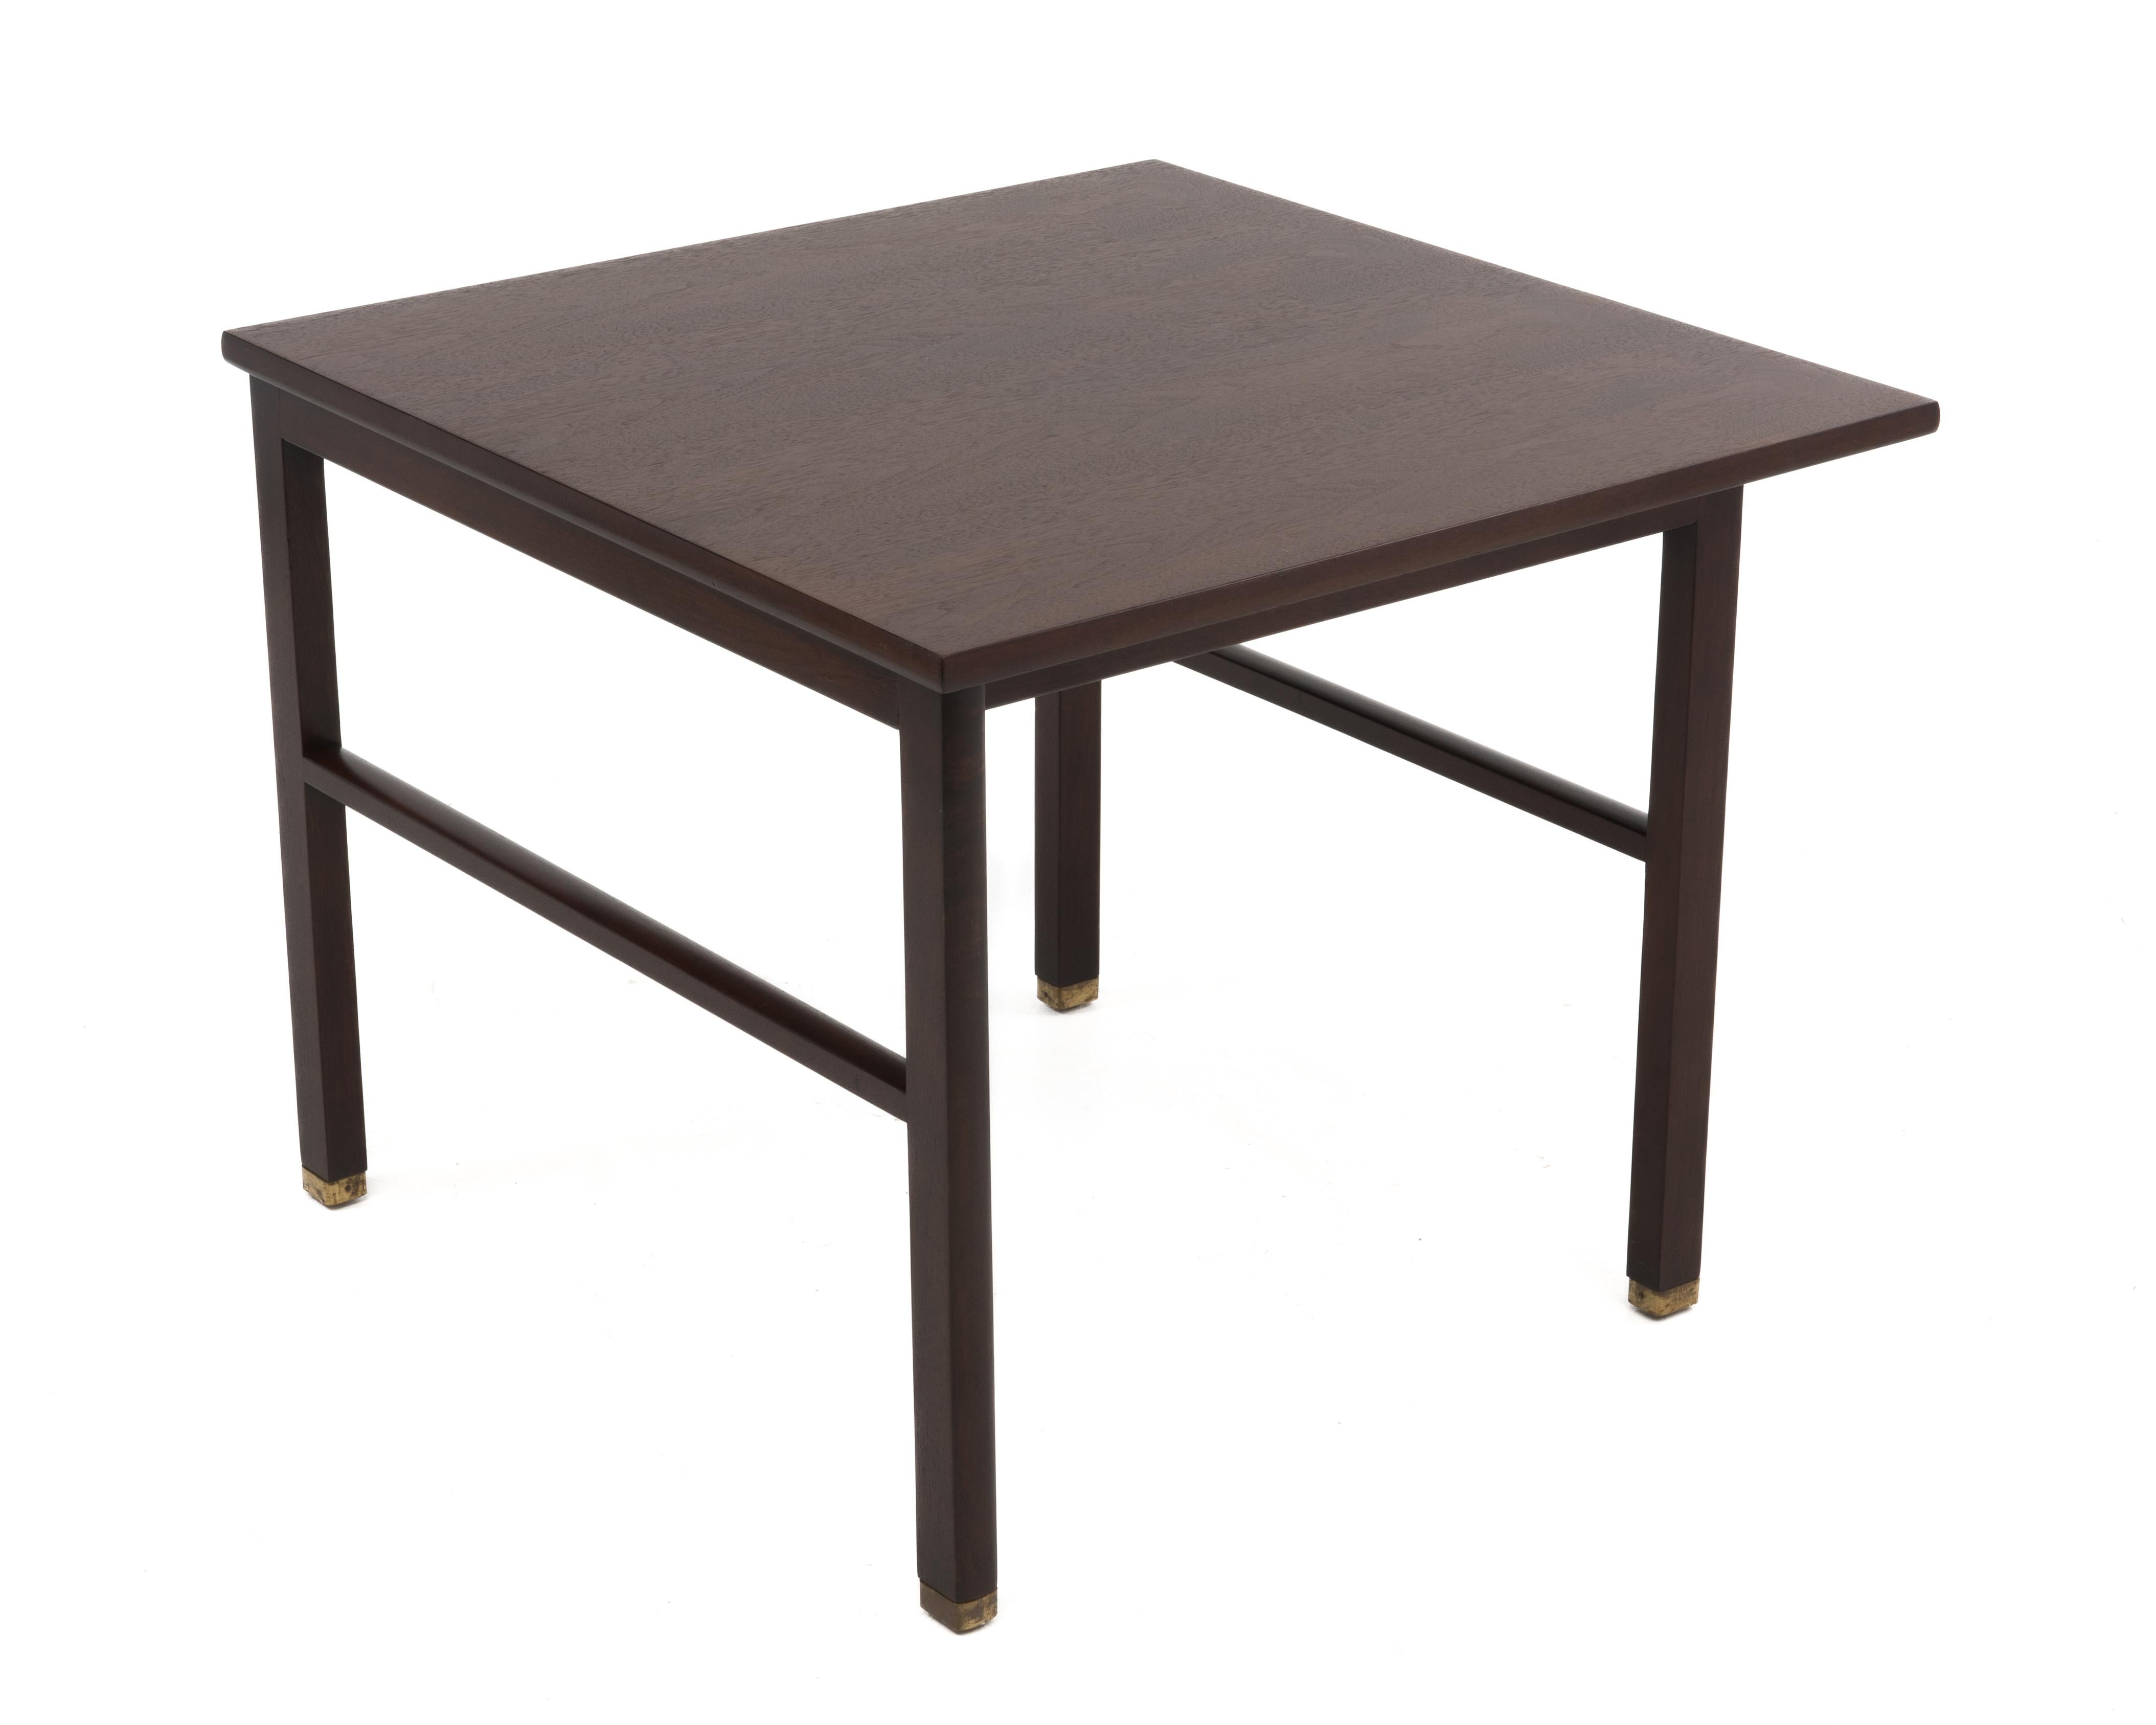 American Cantilevered Edward Wormley Dunbar Square Side End Table 1960s Walnut Brass Tag